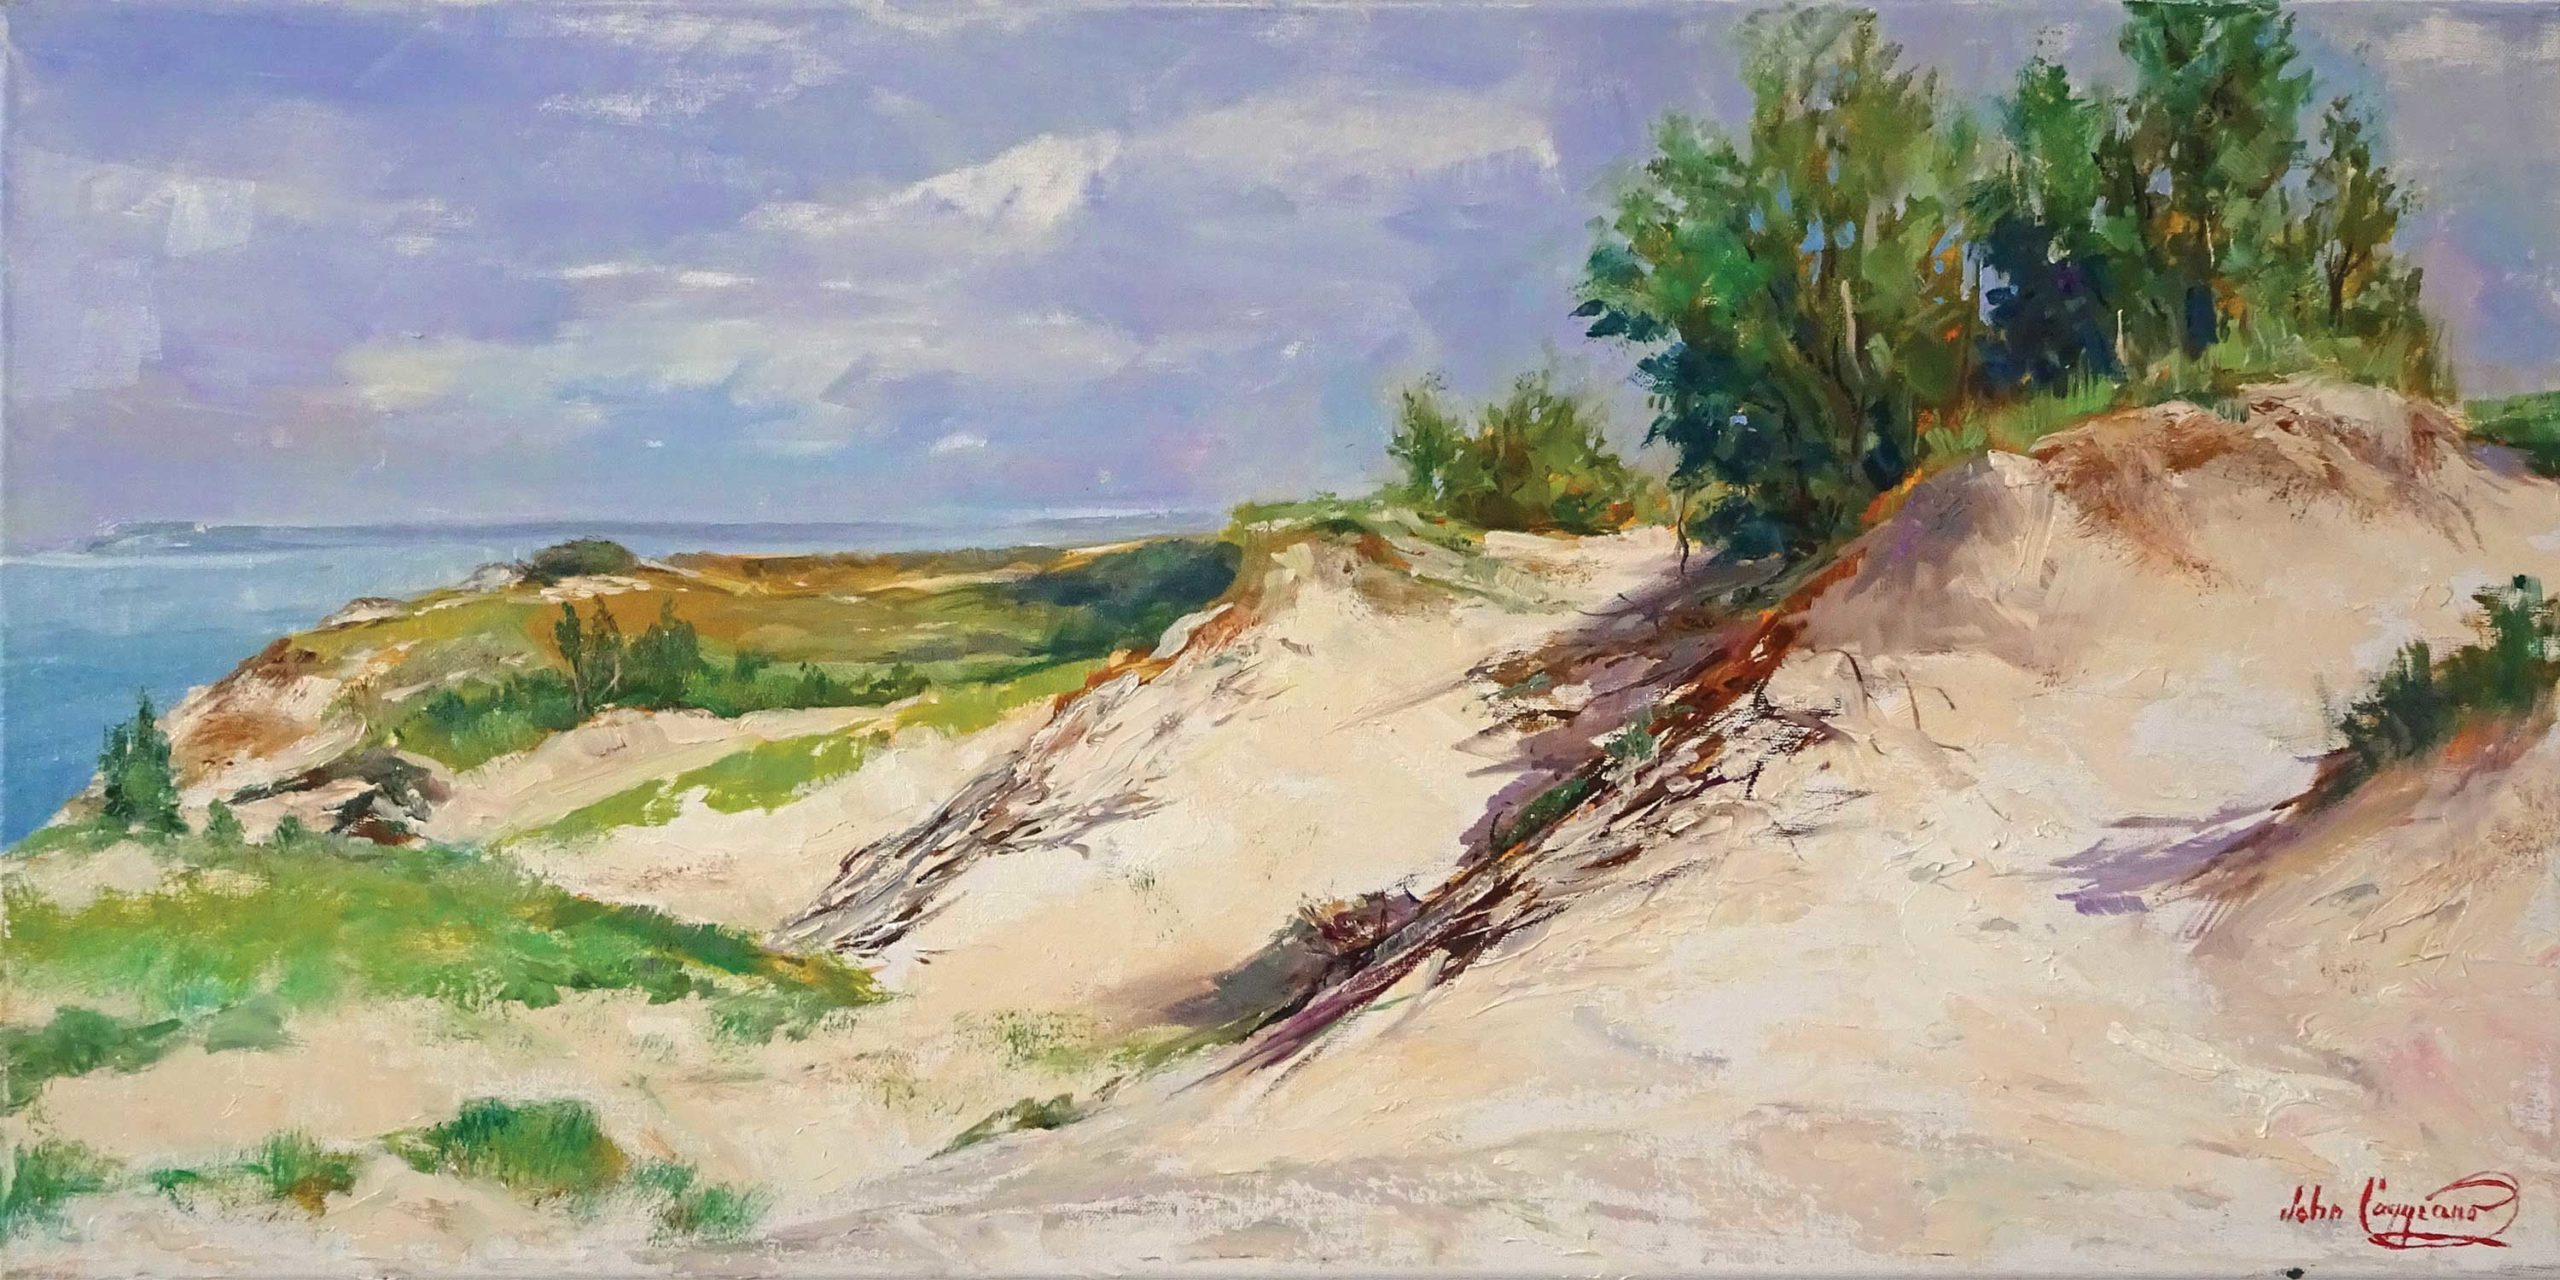 John Caggiano (b. 1949), "Sleepy Dunes," [Sleeping Bear Dunes National Lakeshore, Michigan], 2019, oil on linen panel, 12 x 24 in., available from the artist